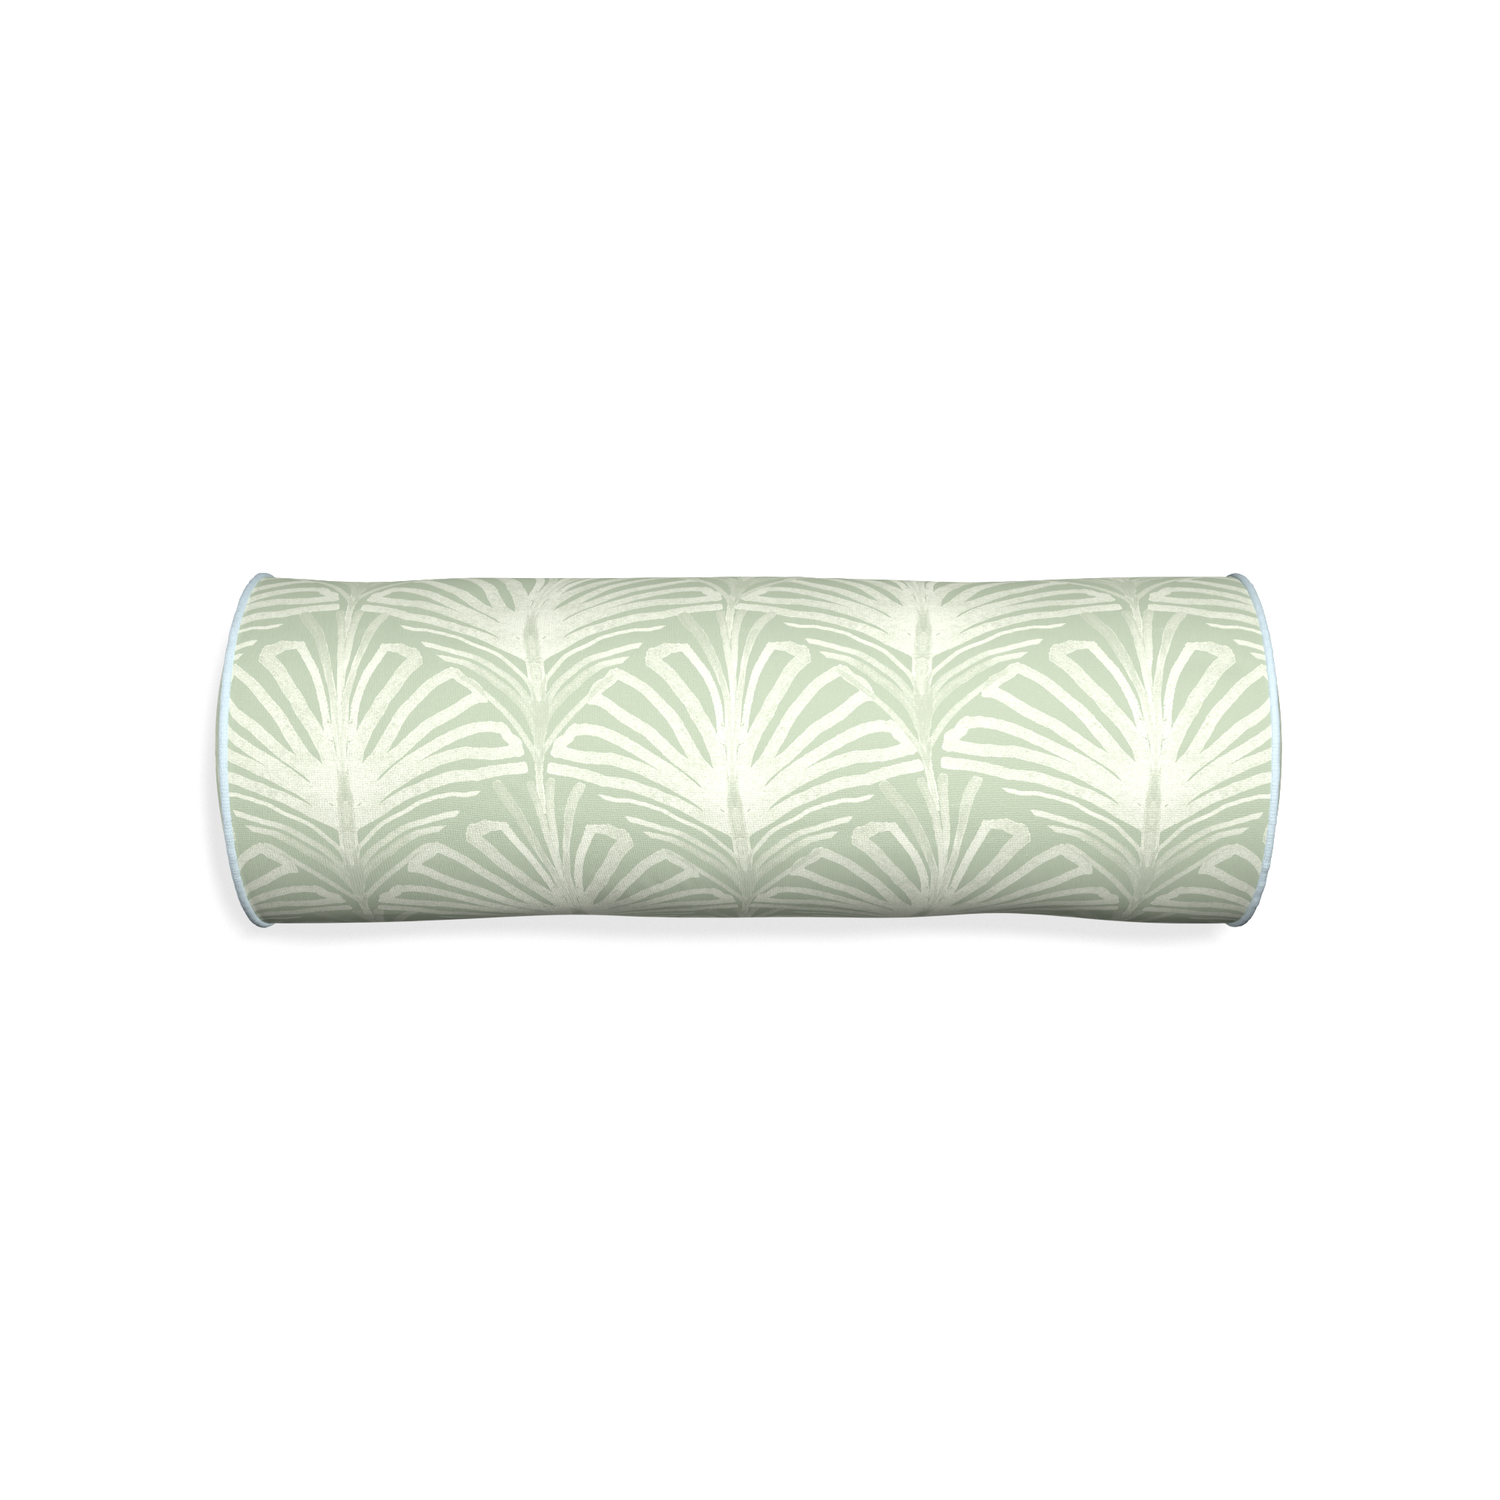 Bolster suzy sage custom sage green palmpillow with powder piping on white background